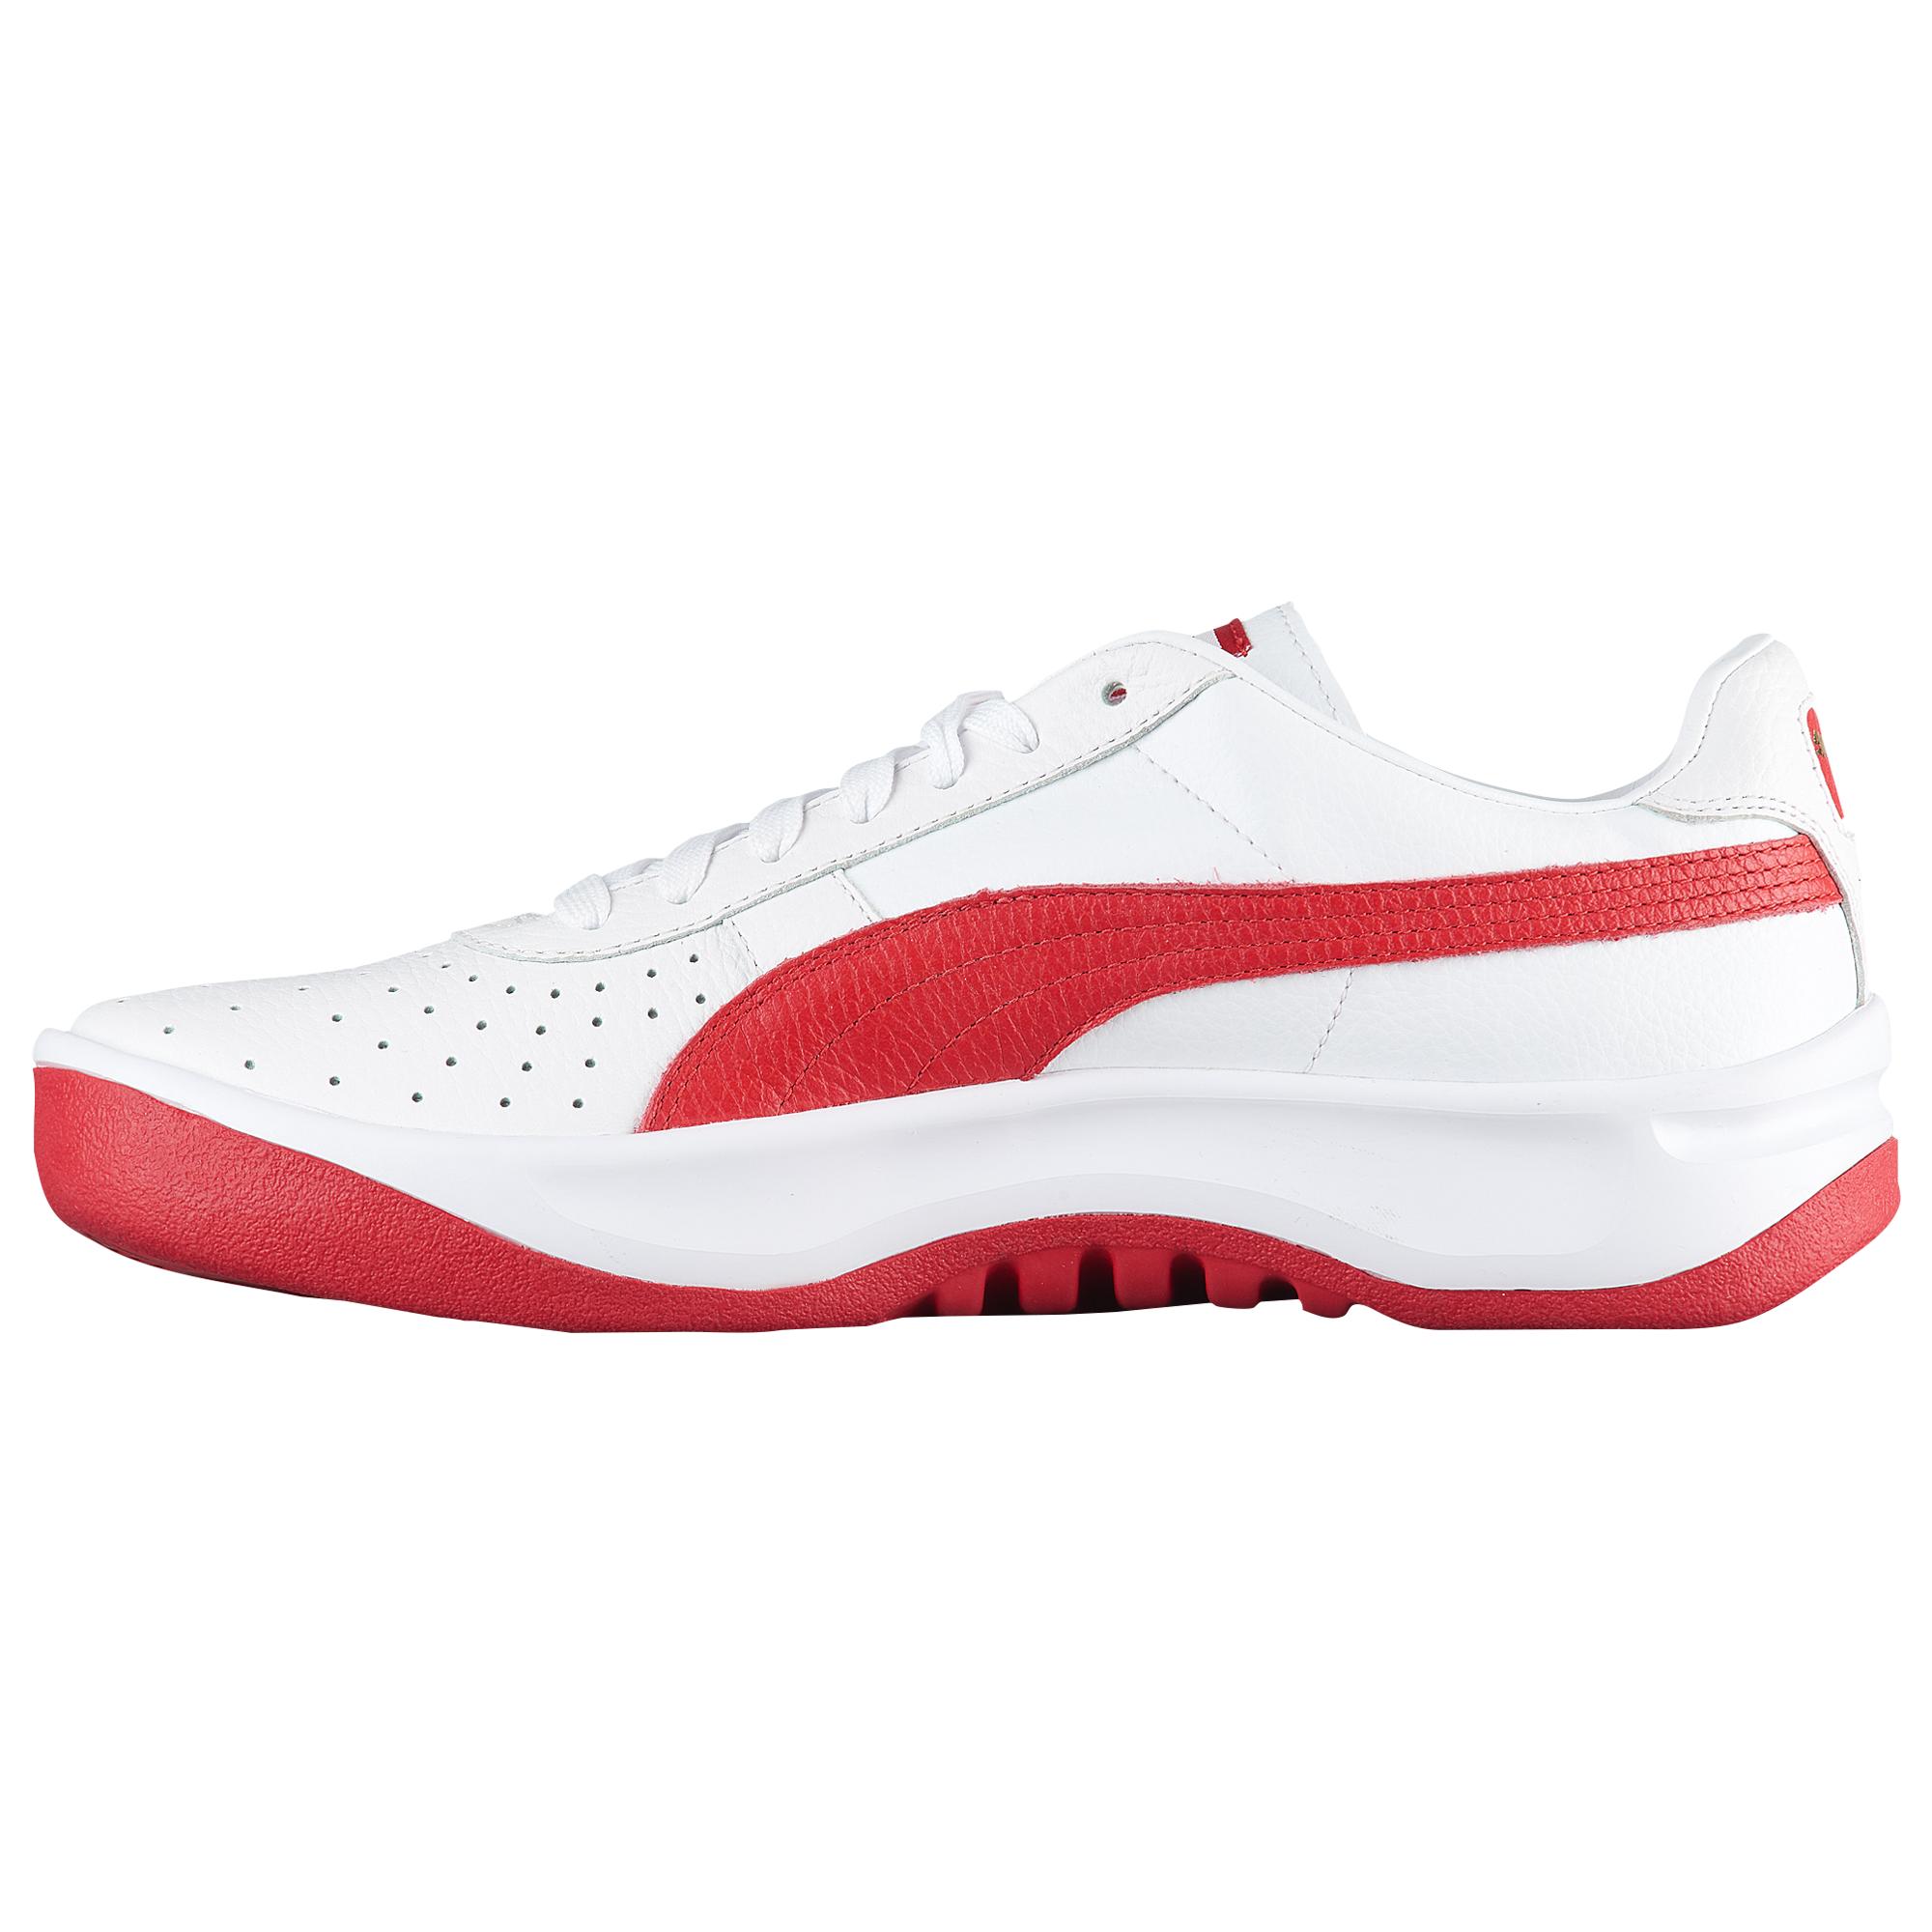 PUMA Gv Special + in Red for Men - Lyst